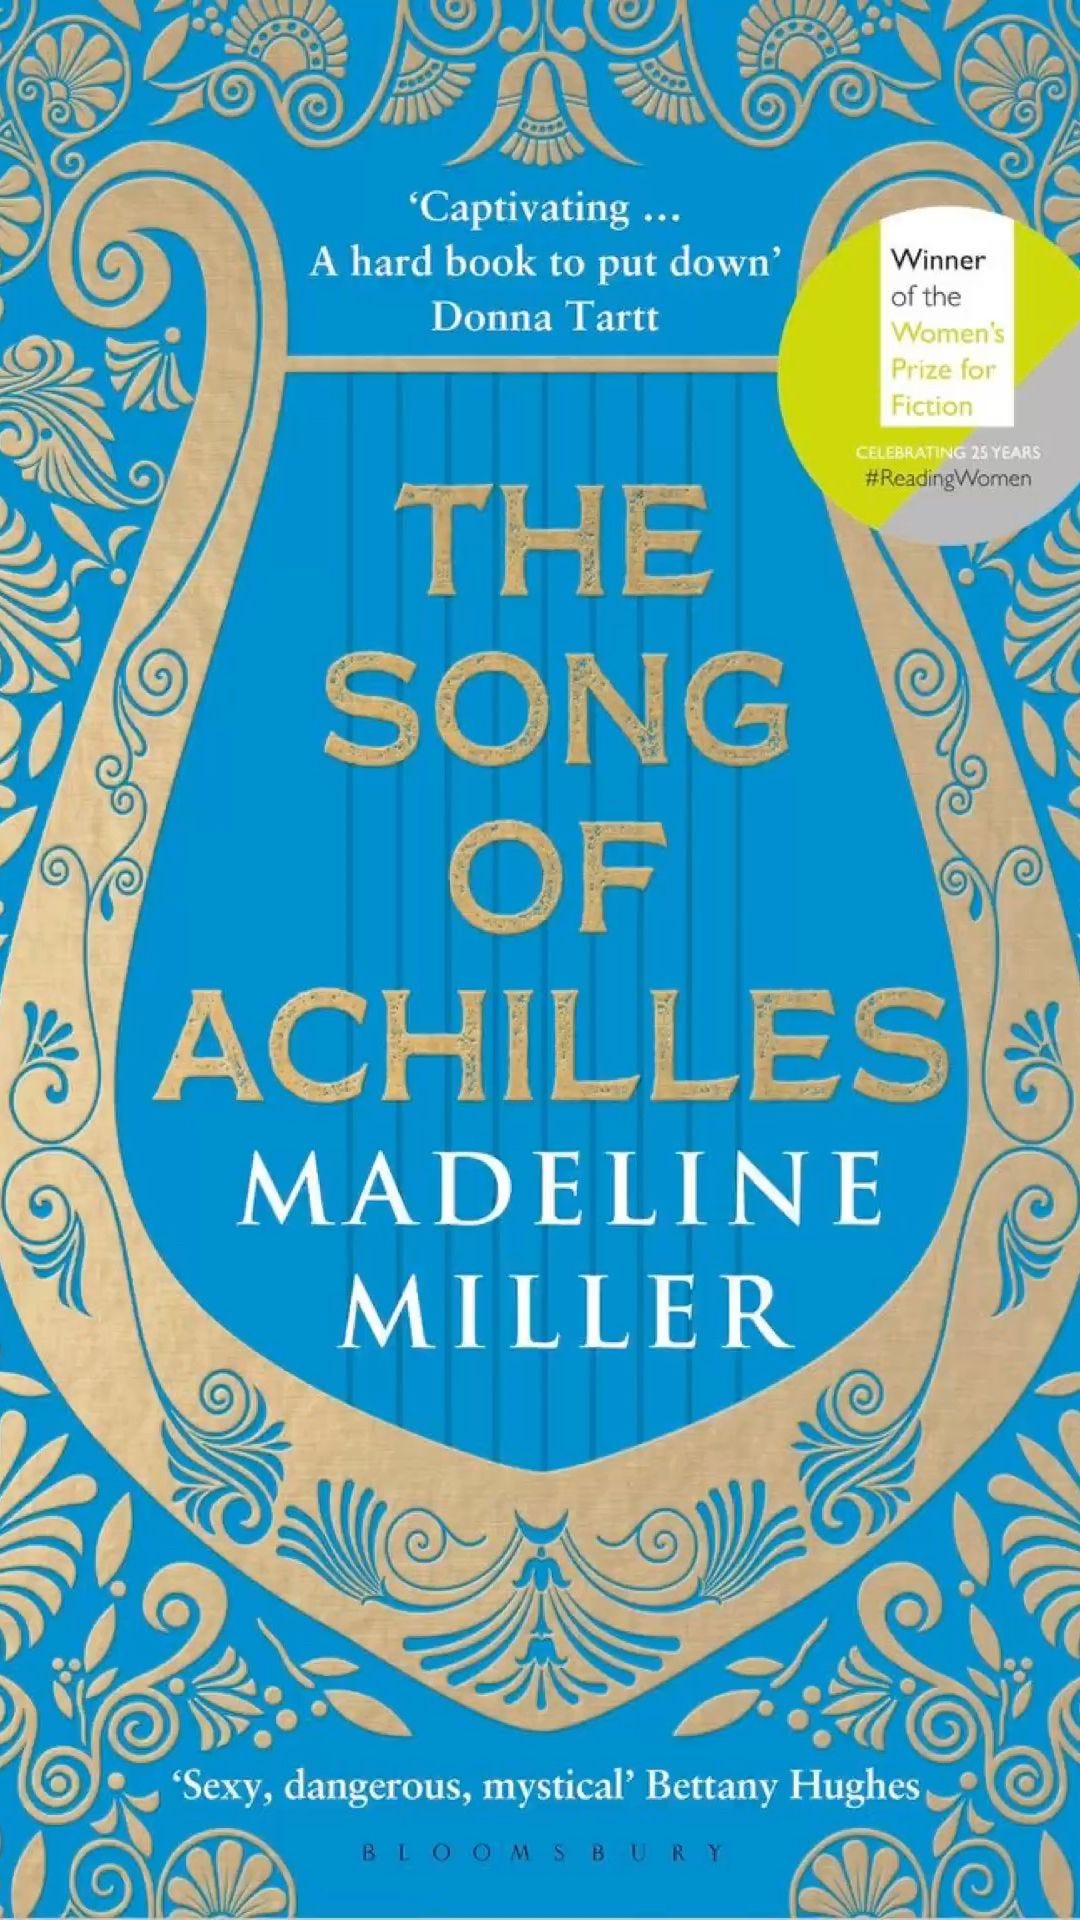 The song of Achilles by Madeline Miller | Books to read, Achilles, Songs